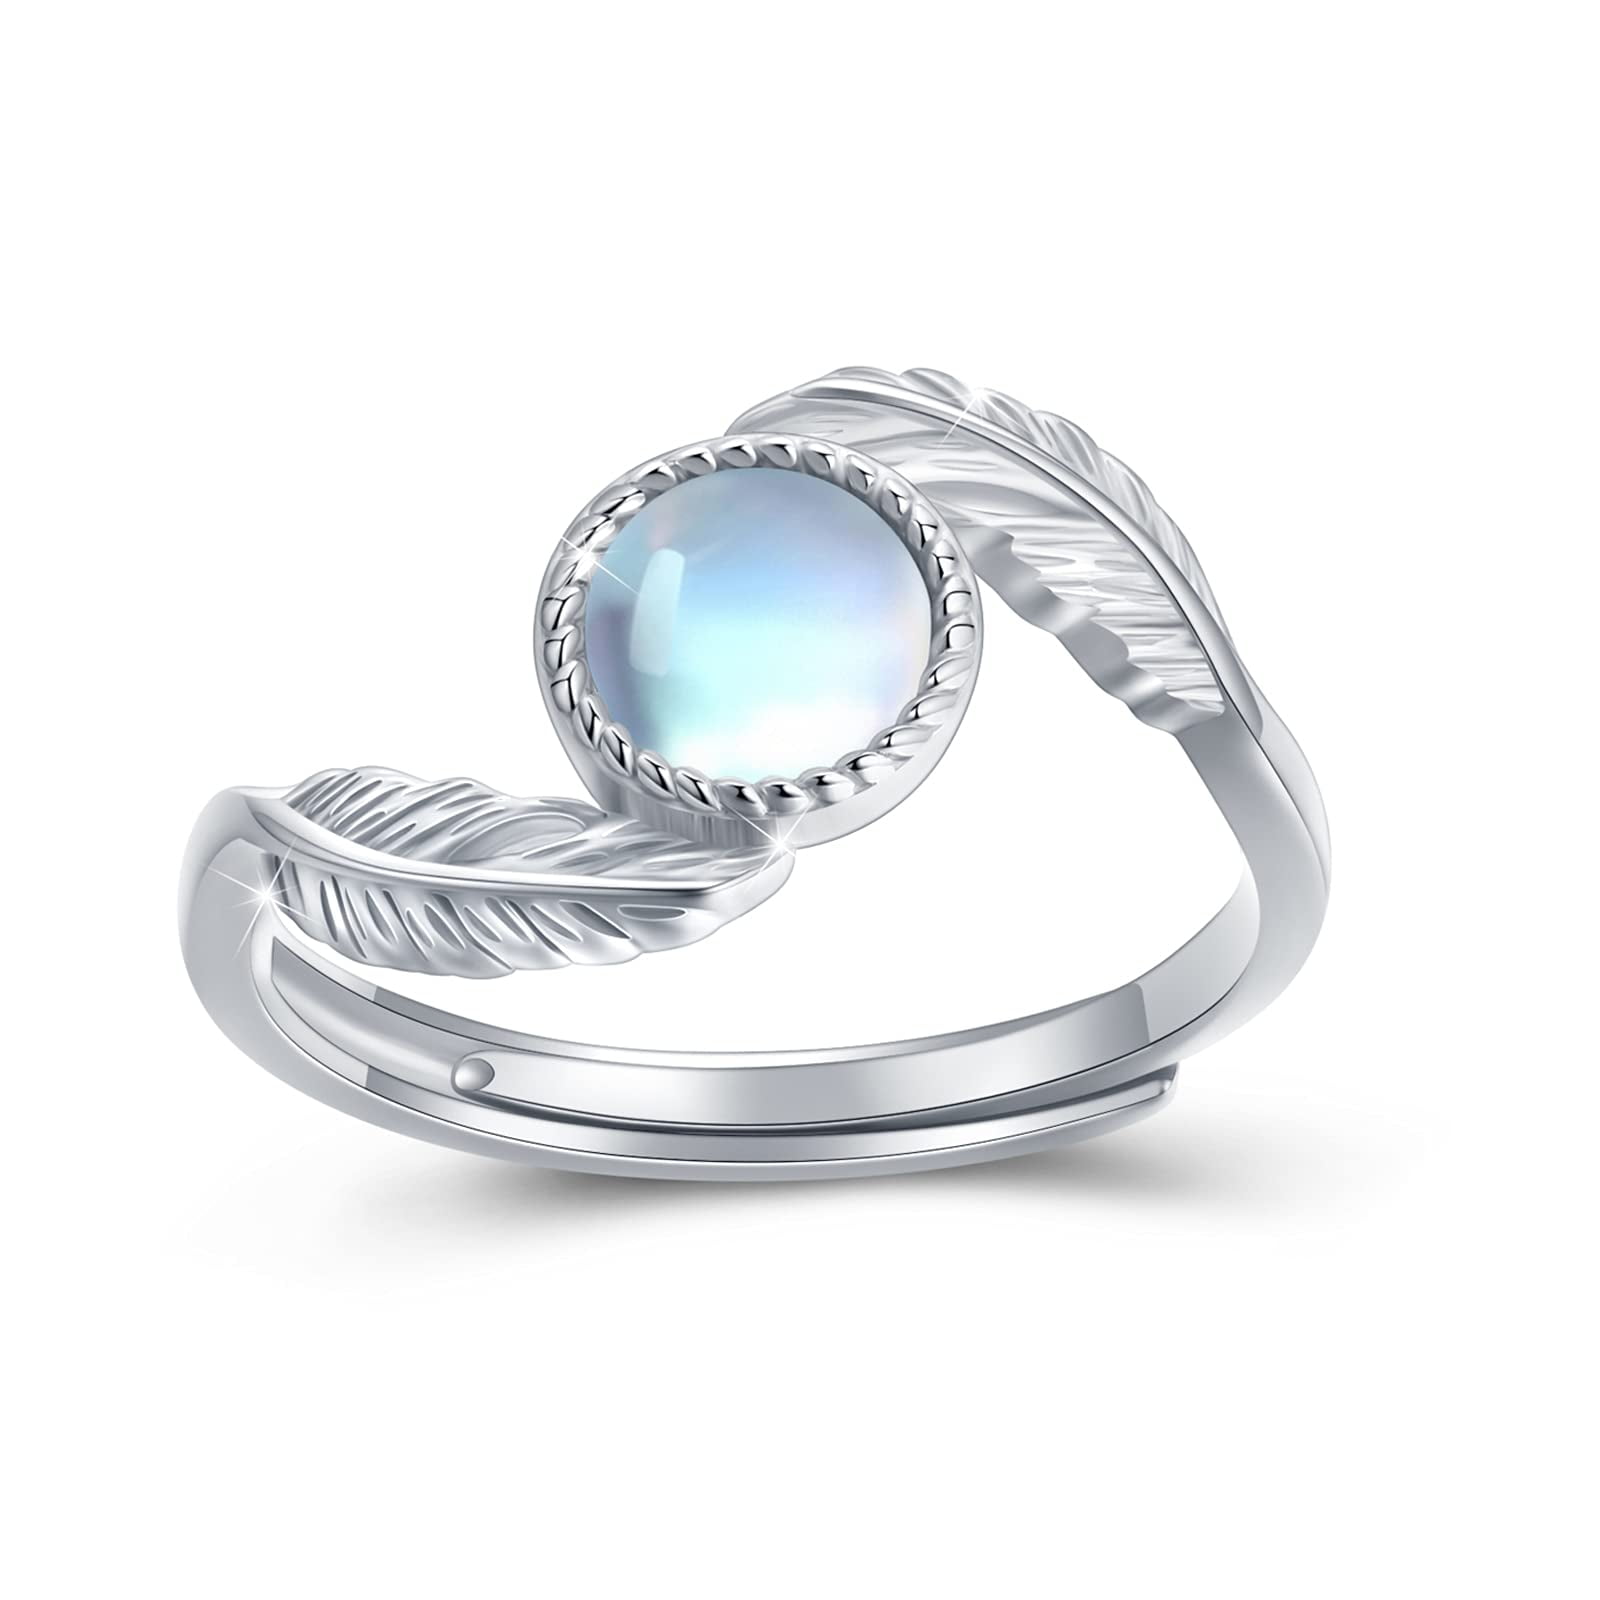 June Birthstone Christmas Gift Natural Moonstone Ring Rainbow Moonstone,925 Sterling Silver,Statement Ring,Signet Ring Father's Day Gift